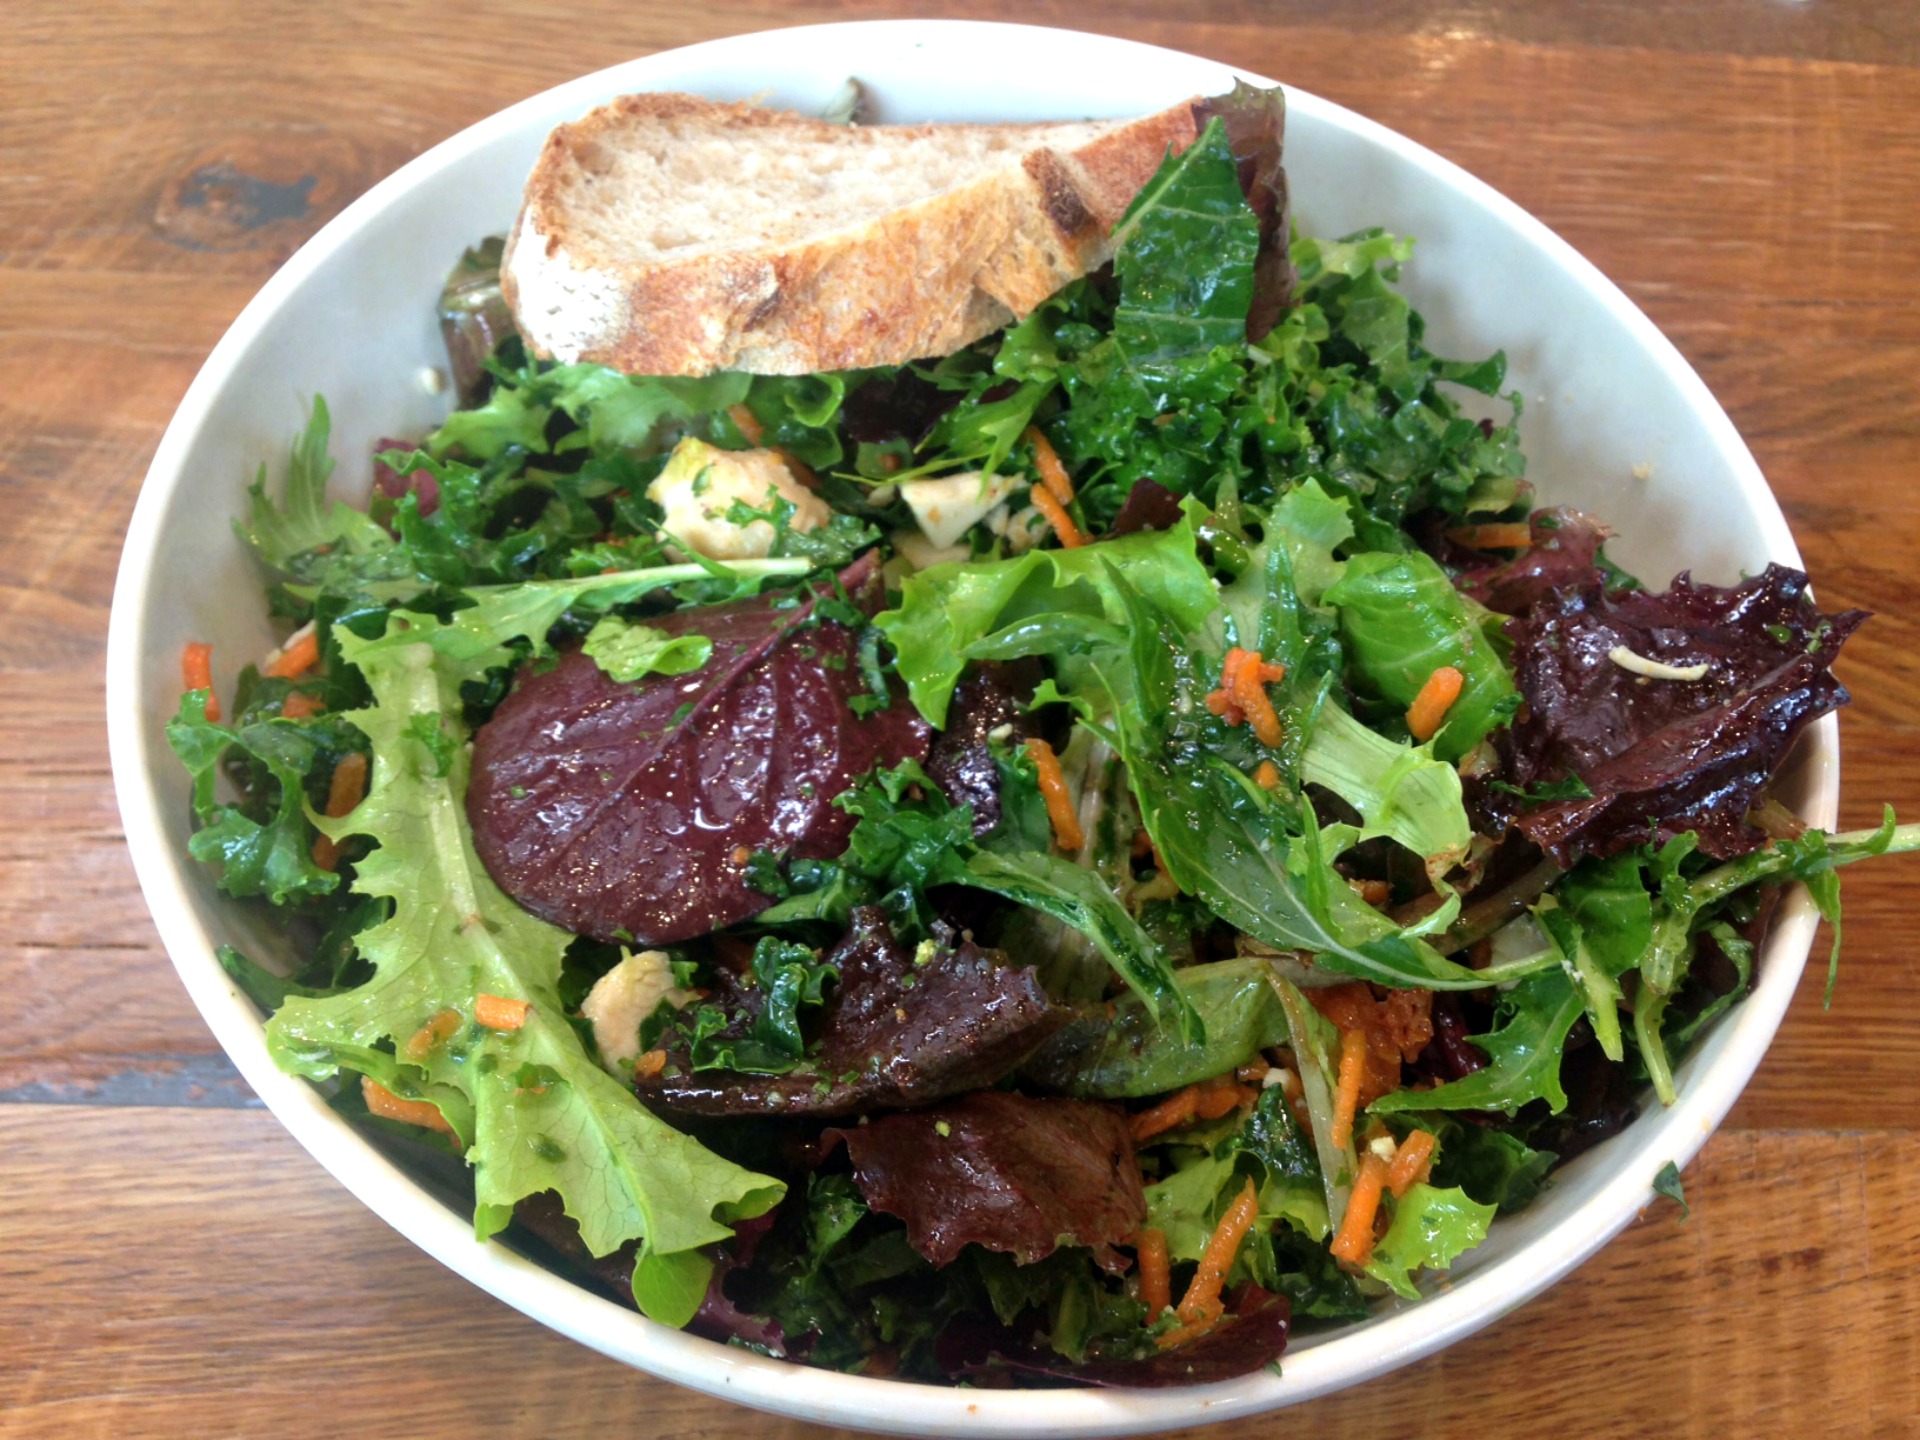 A spring chicken salad from sweetgreen.